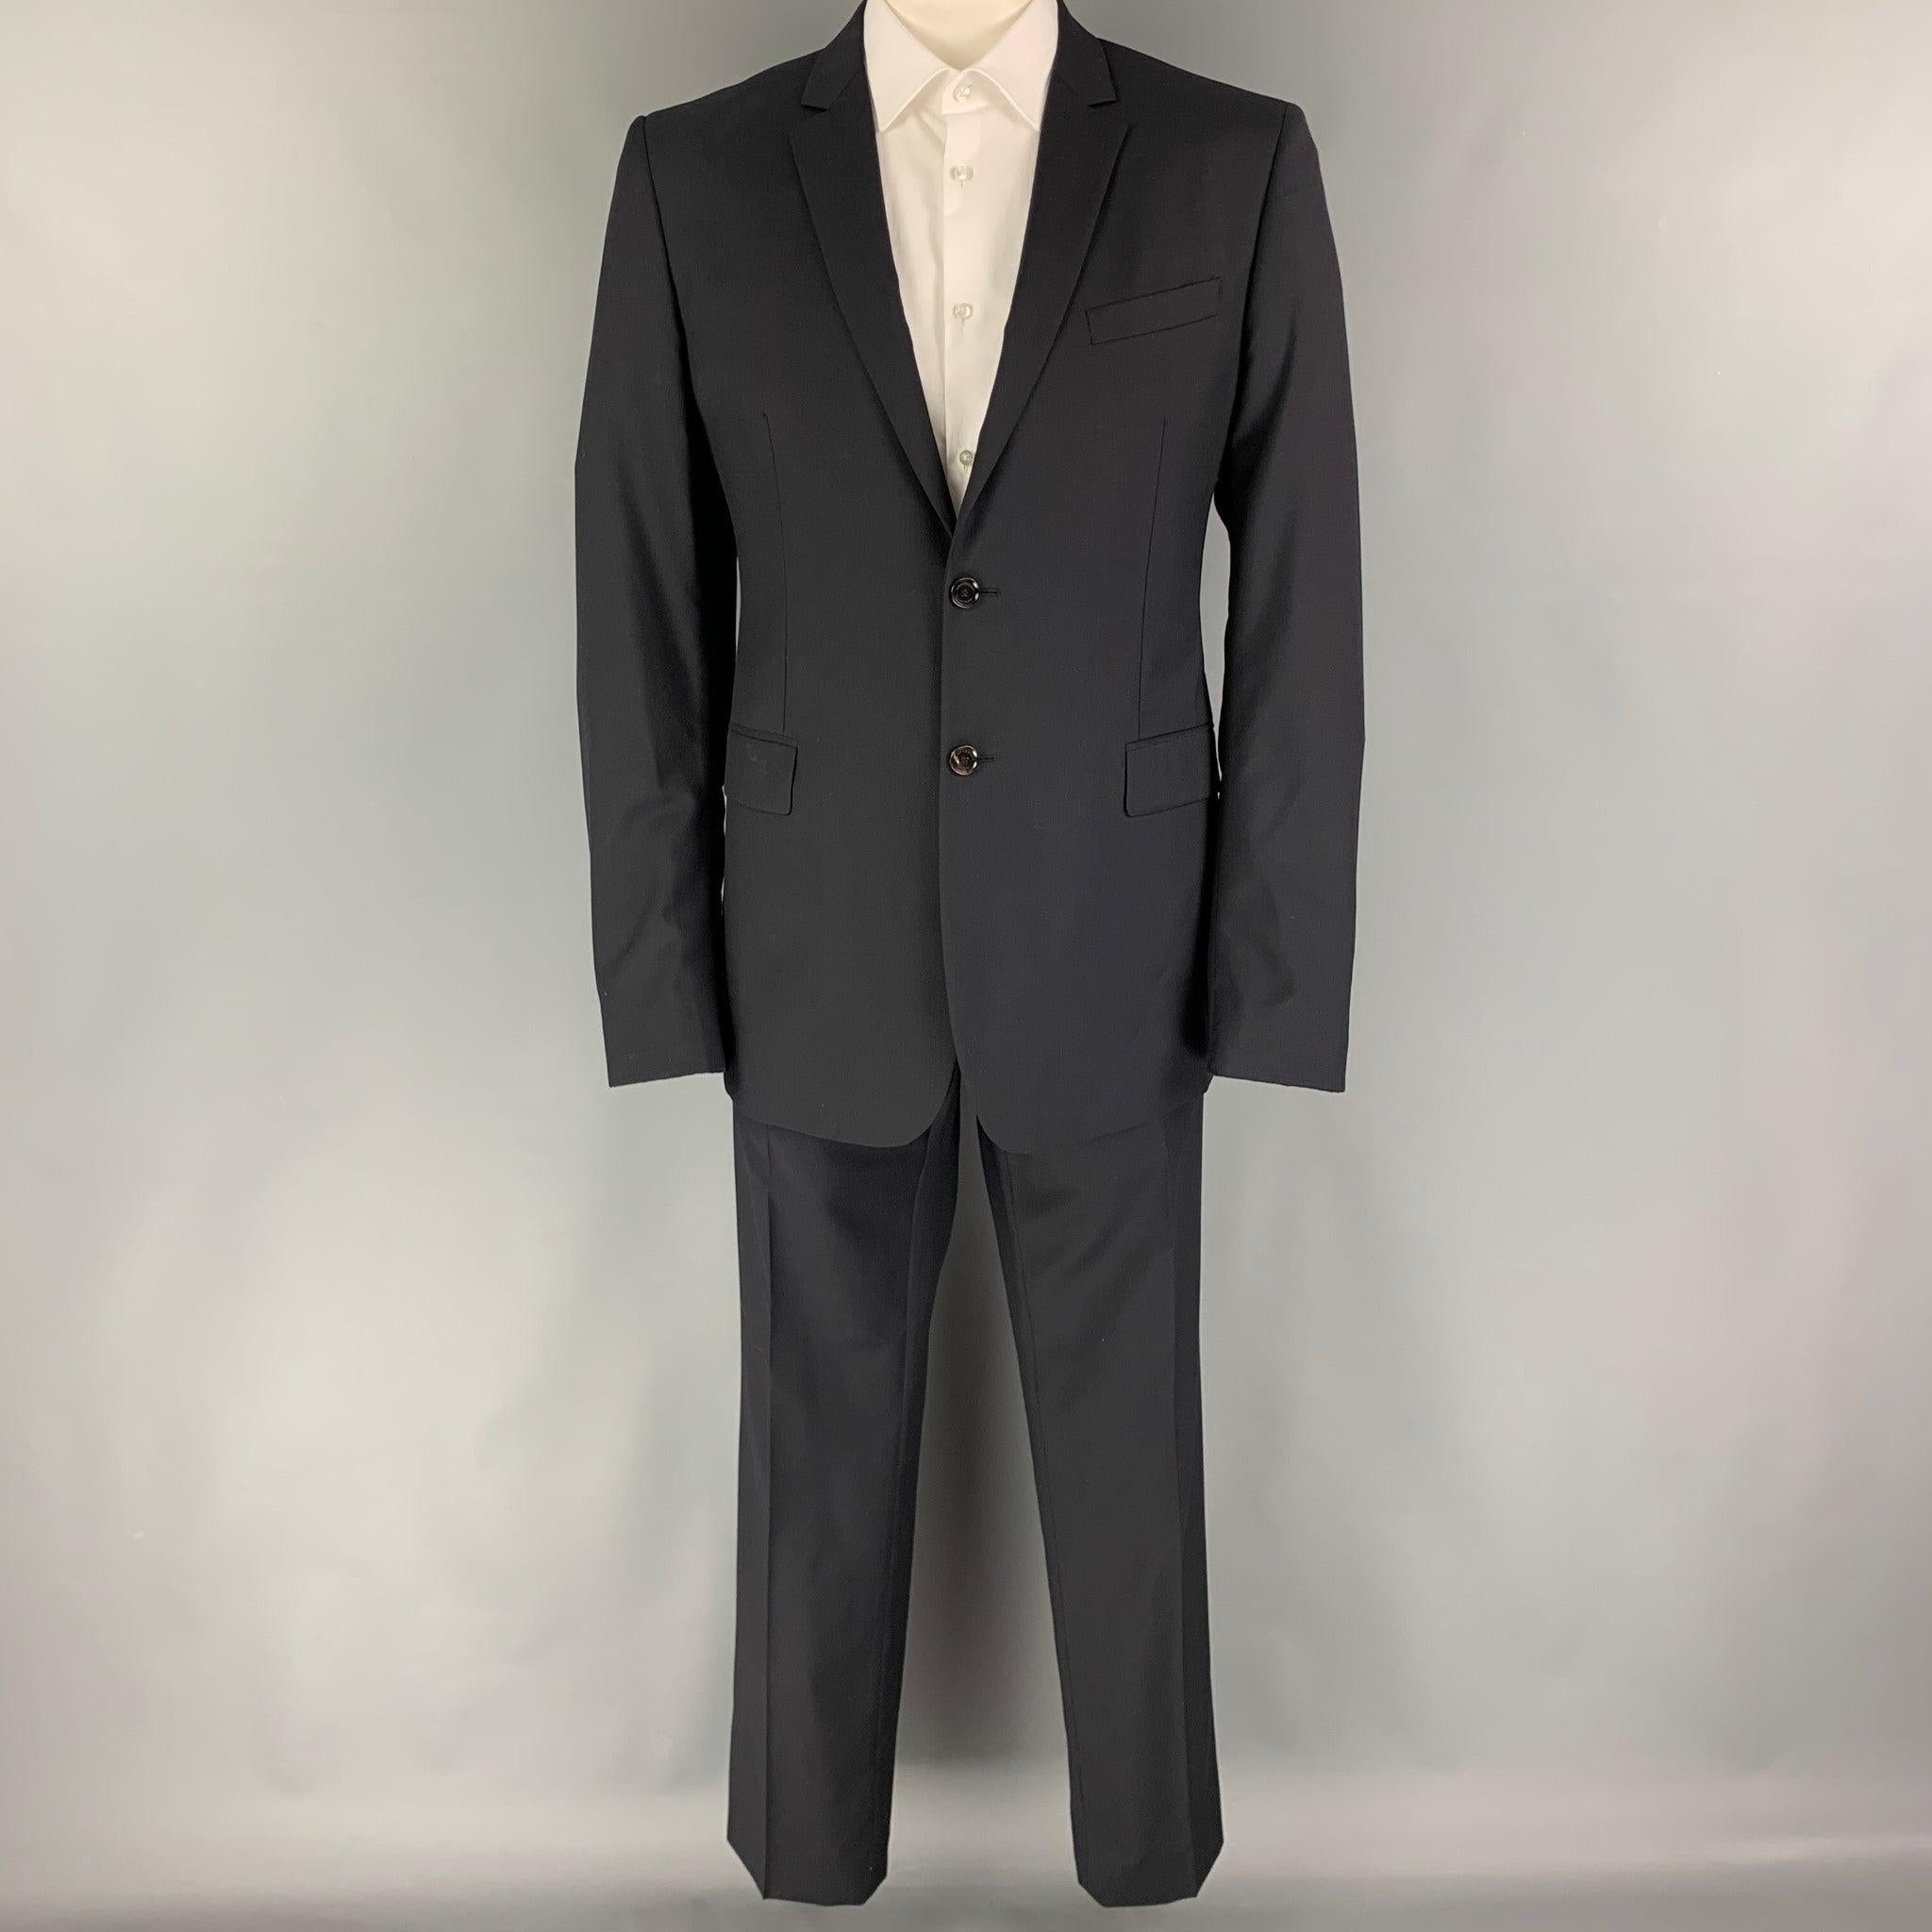 BURBERRY LONDON
suit comes in a navy wool with a full liner and includes a single breasted, double button sport coat with a notch lapel and matching flat front trousers. Made in Italy. Excellent Pre-Owned Condition. 

Marked:   Marked IT 56 but fits